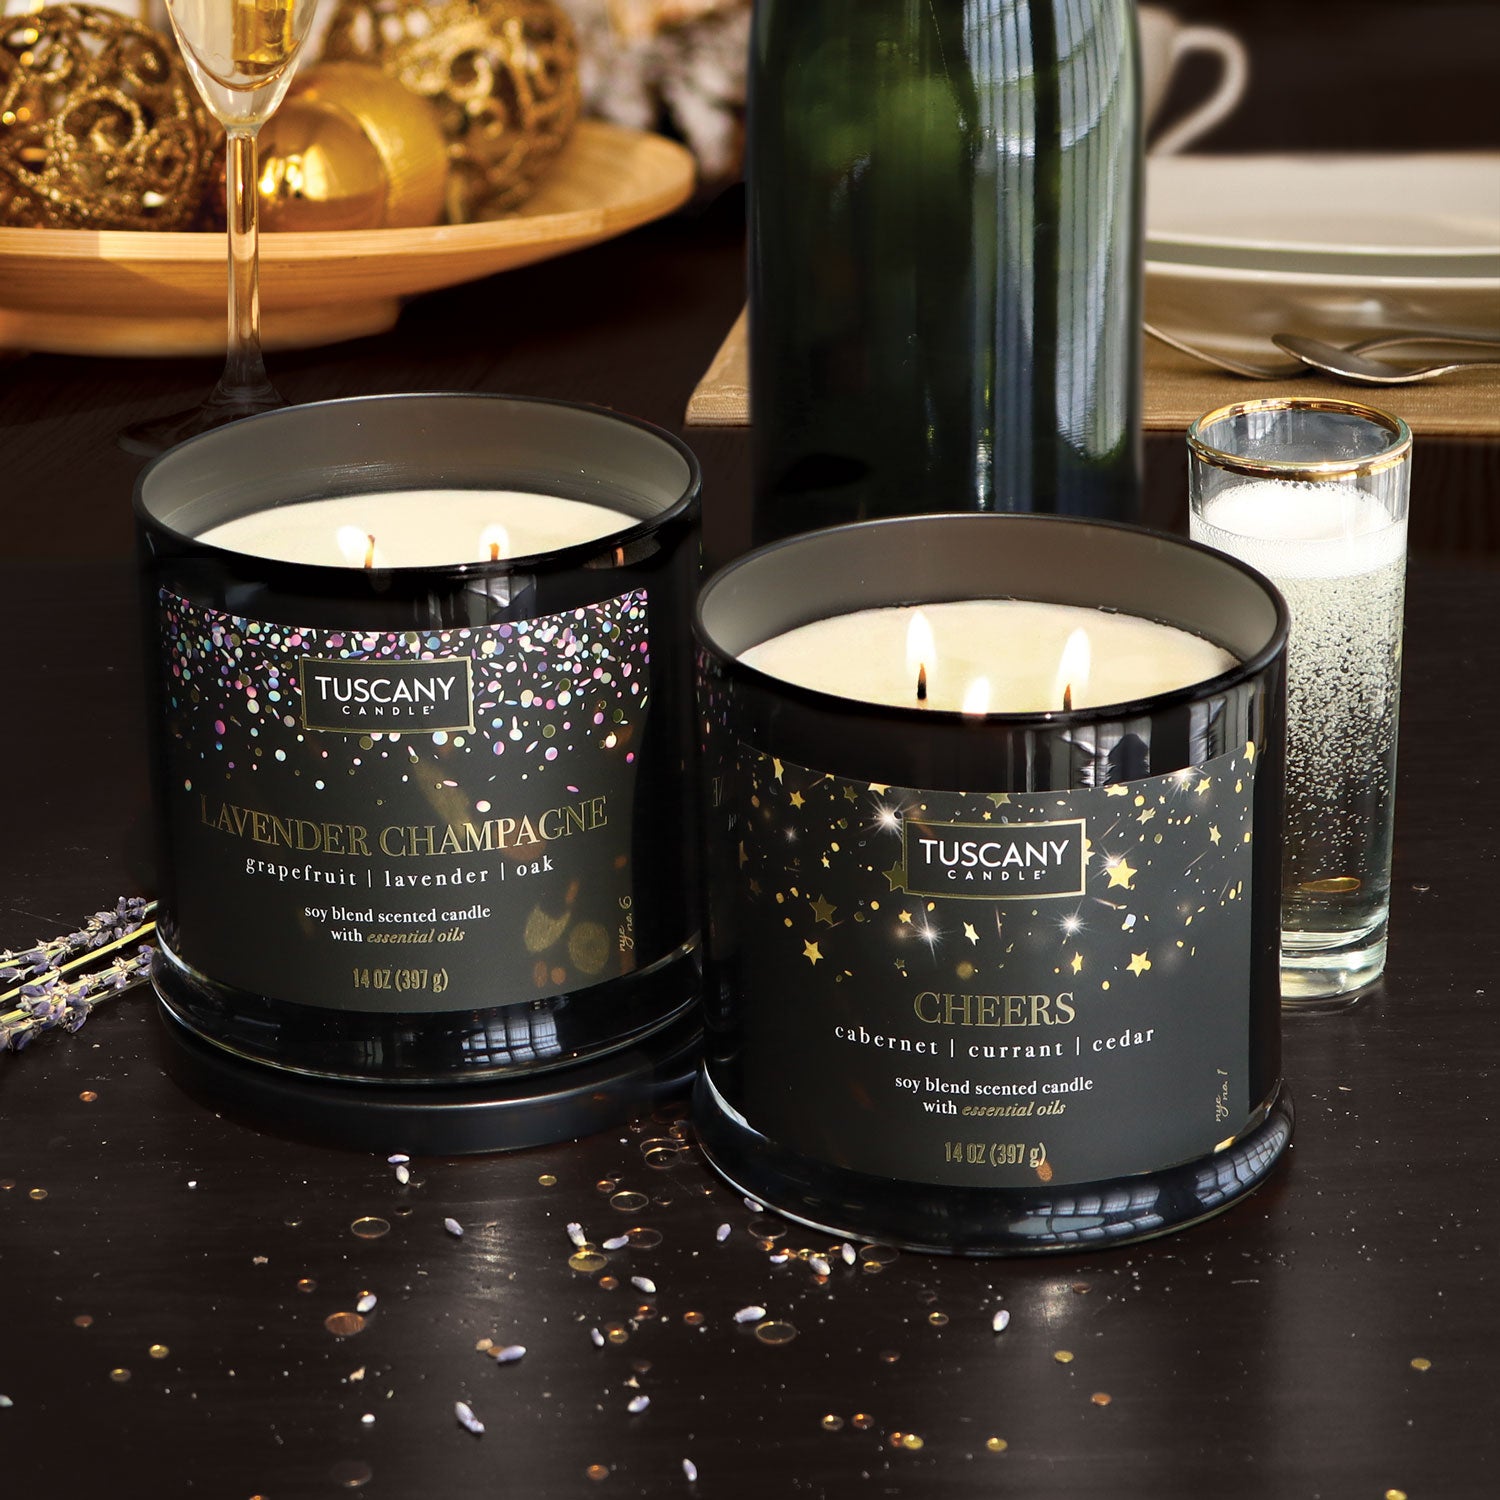 A Cheers Scented Candle (14 oz) from the Tuscany Candle brand on a table next to a bottle of champagne for a holiday celebration.